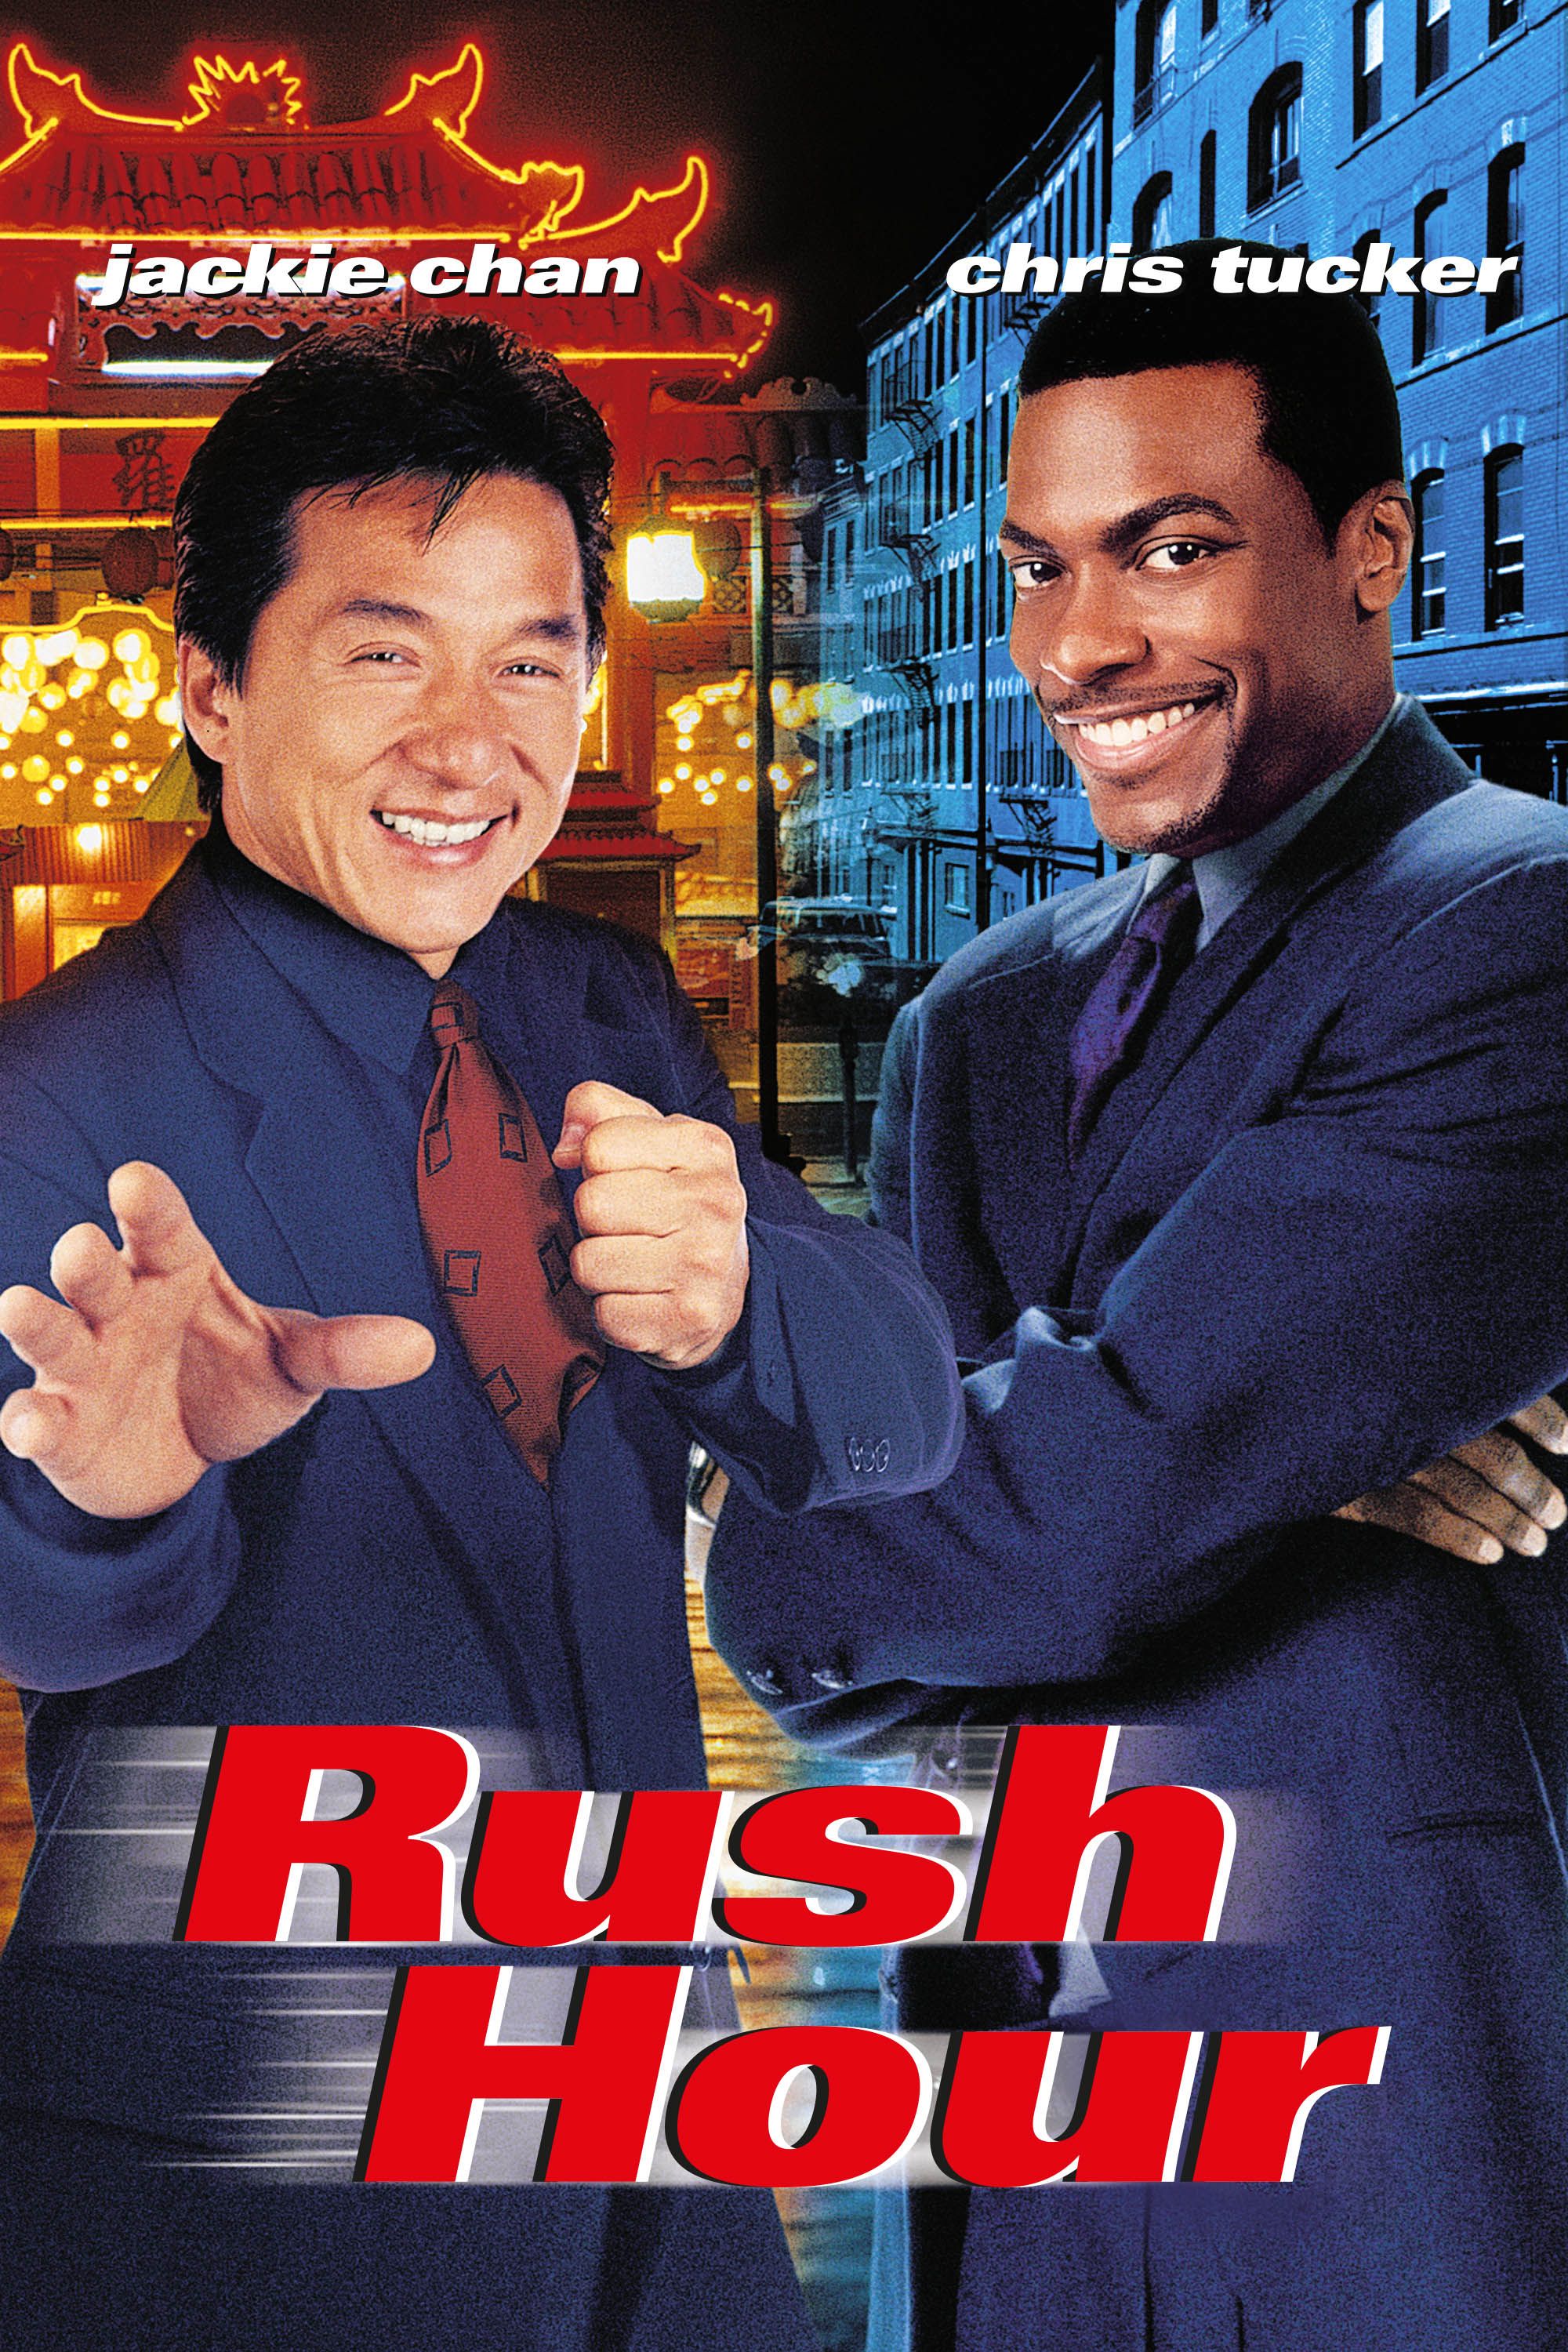 andrea cousens recommends rush hour 1 full movie download pic